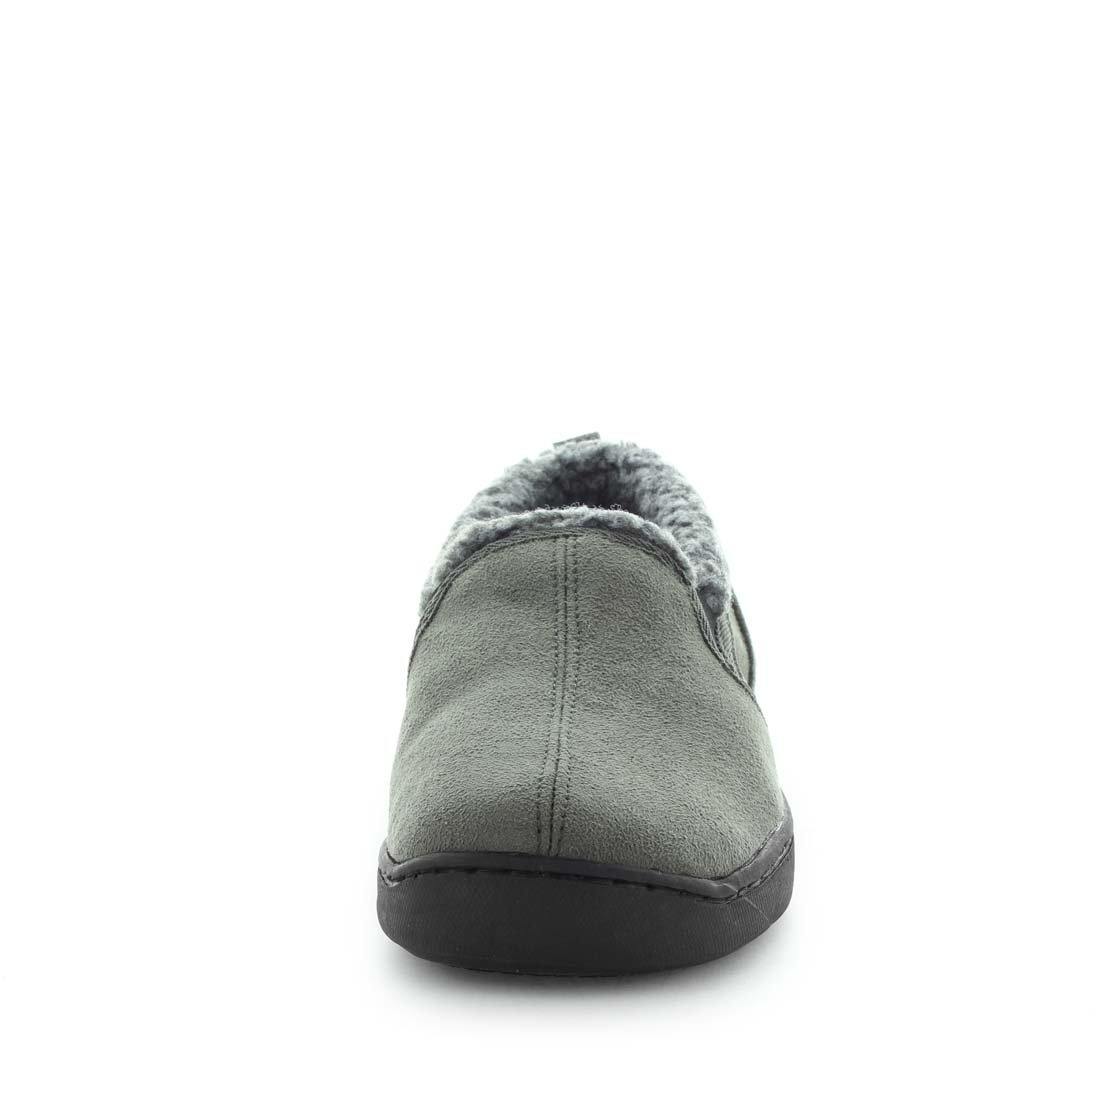 Classic mens slipper, Eliu by panda slippers. A grey/charcoal grey slip on style slipper with soft materials and comfy fit design for indoor wear. Showing a faux fur trimming and a non slip sole.x